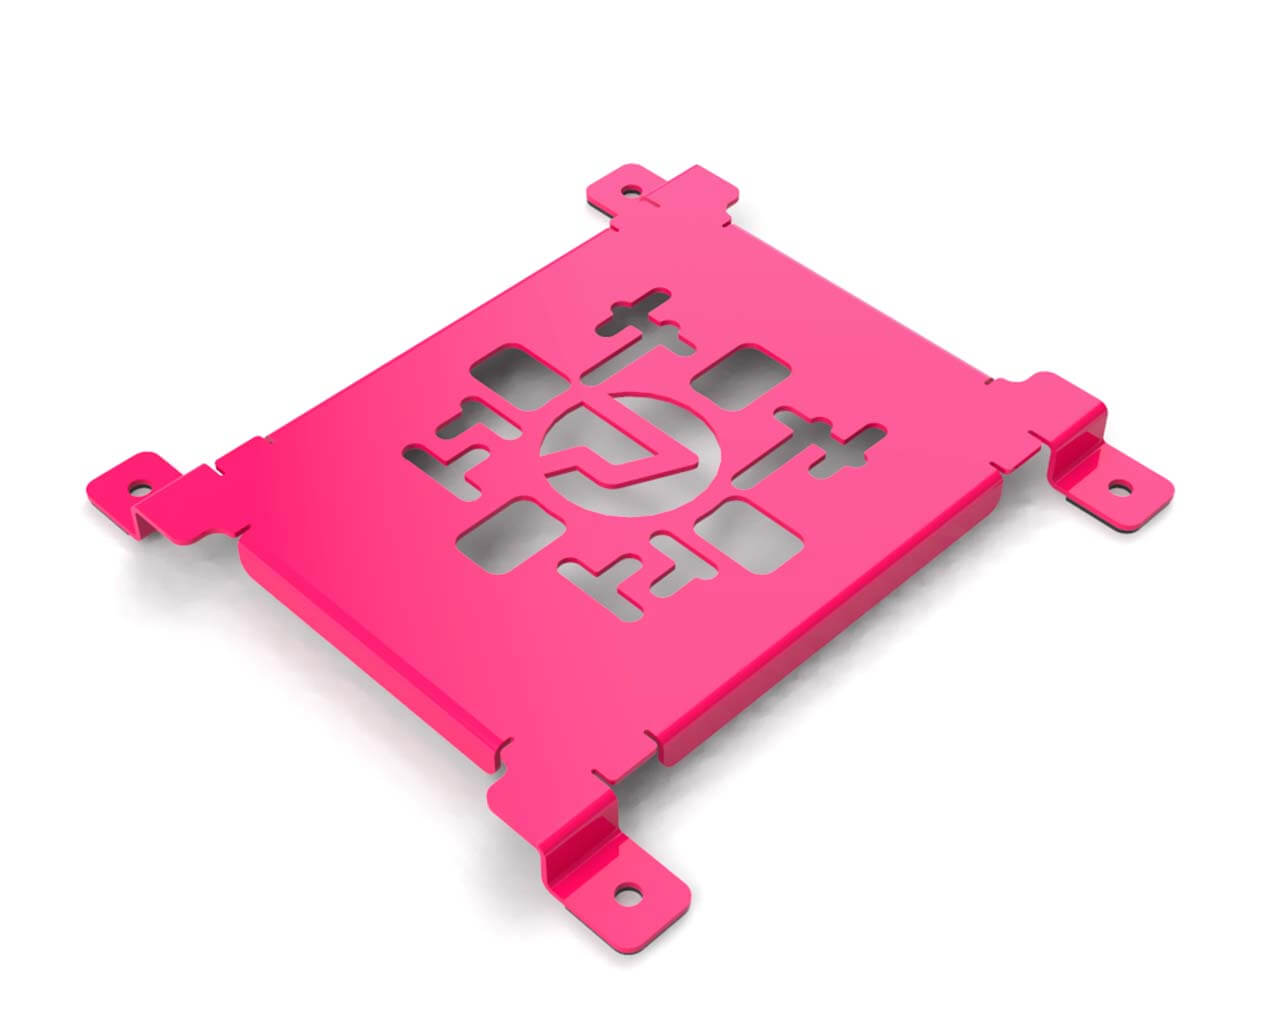 PrimoChill SX Spider Mount Bracket - 140mm Series - PrimoChill - KEEPING IT COOL UV Pink